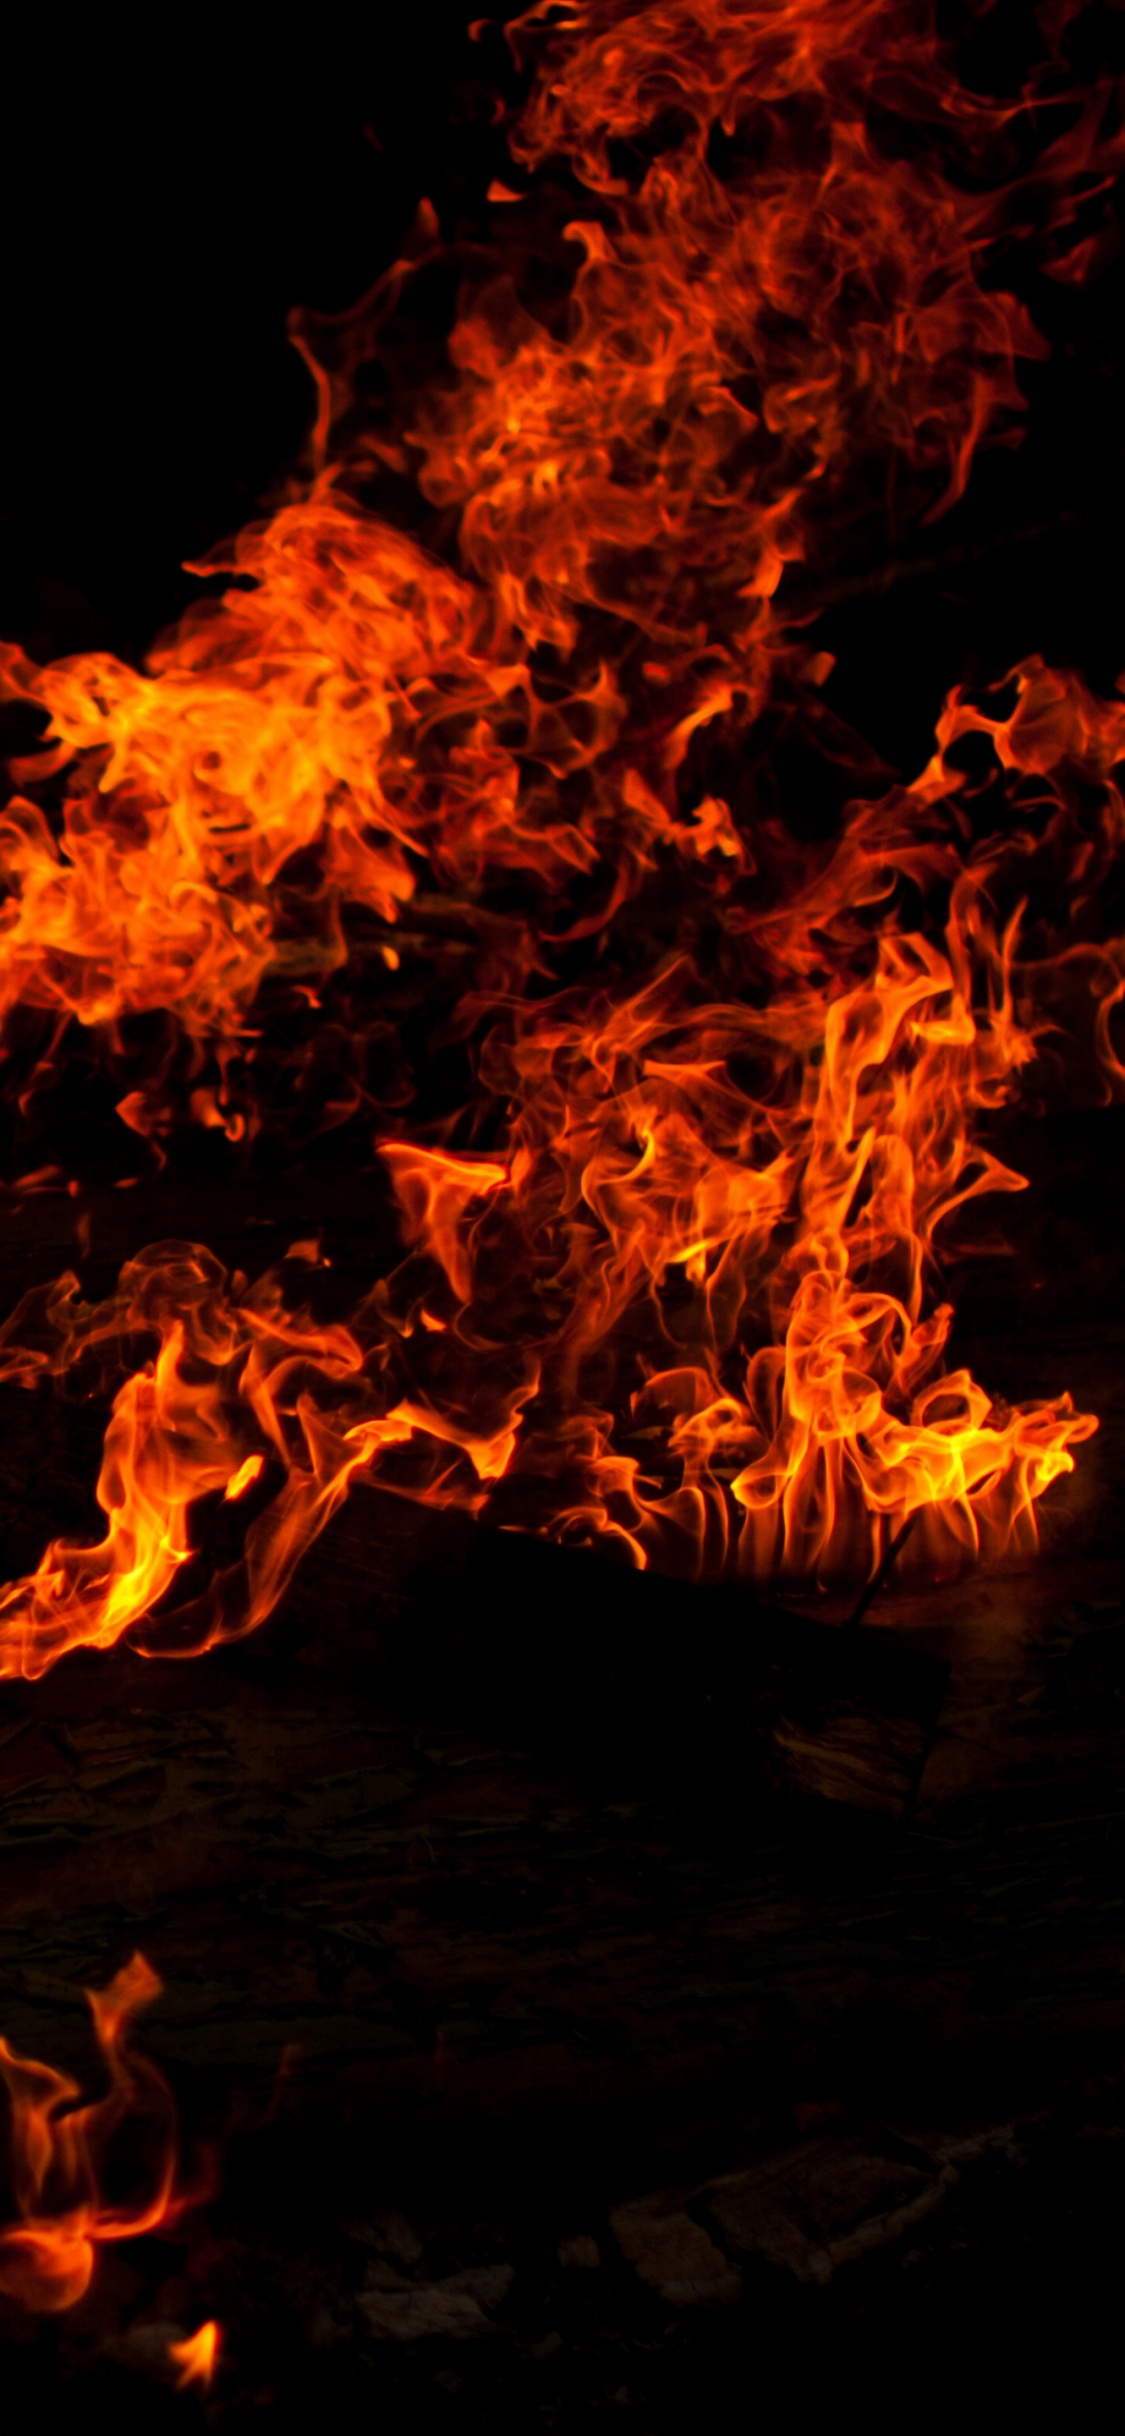 Fire on Fire During Night Time. Wallpaper in 1125x2436 Resolution